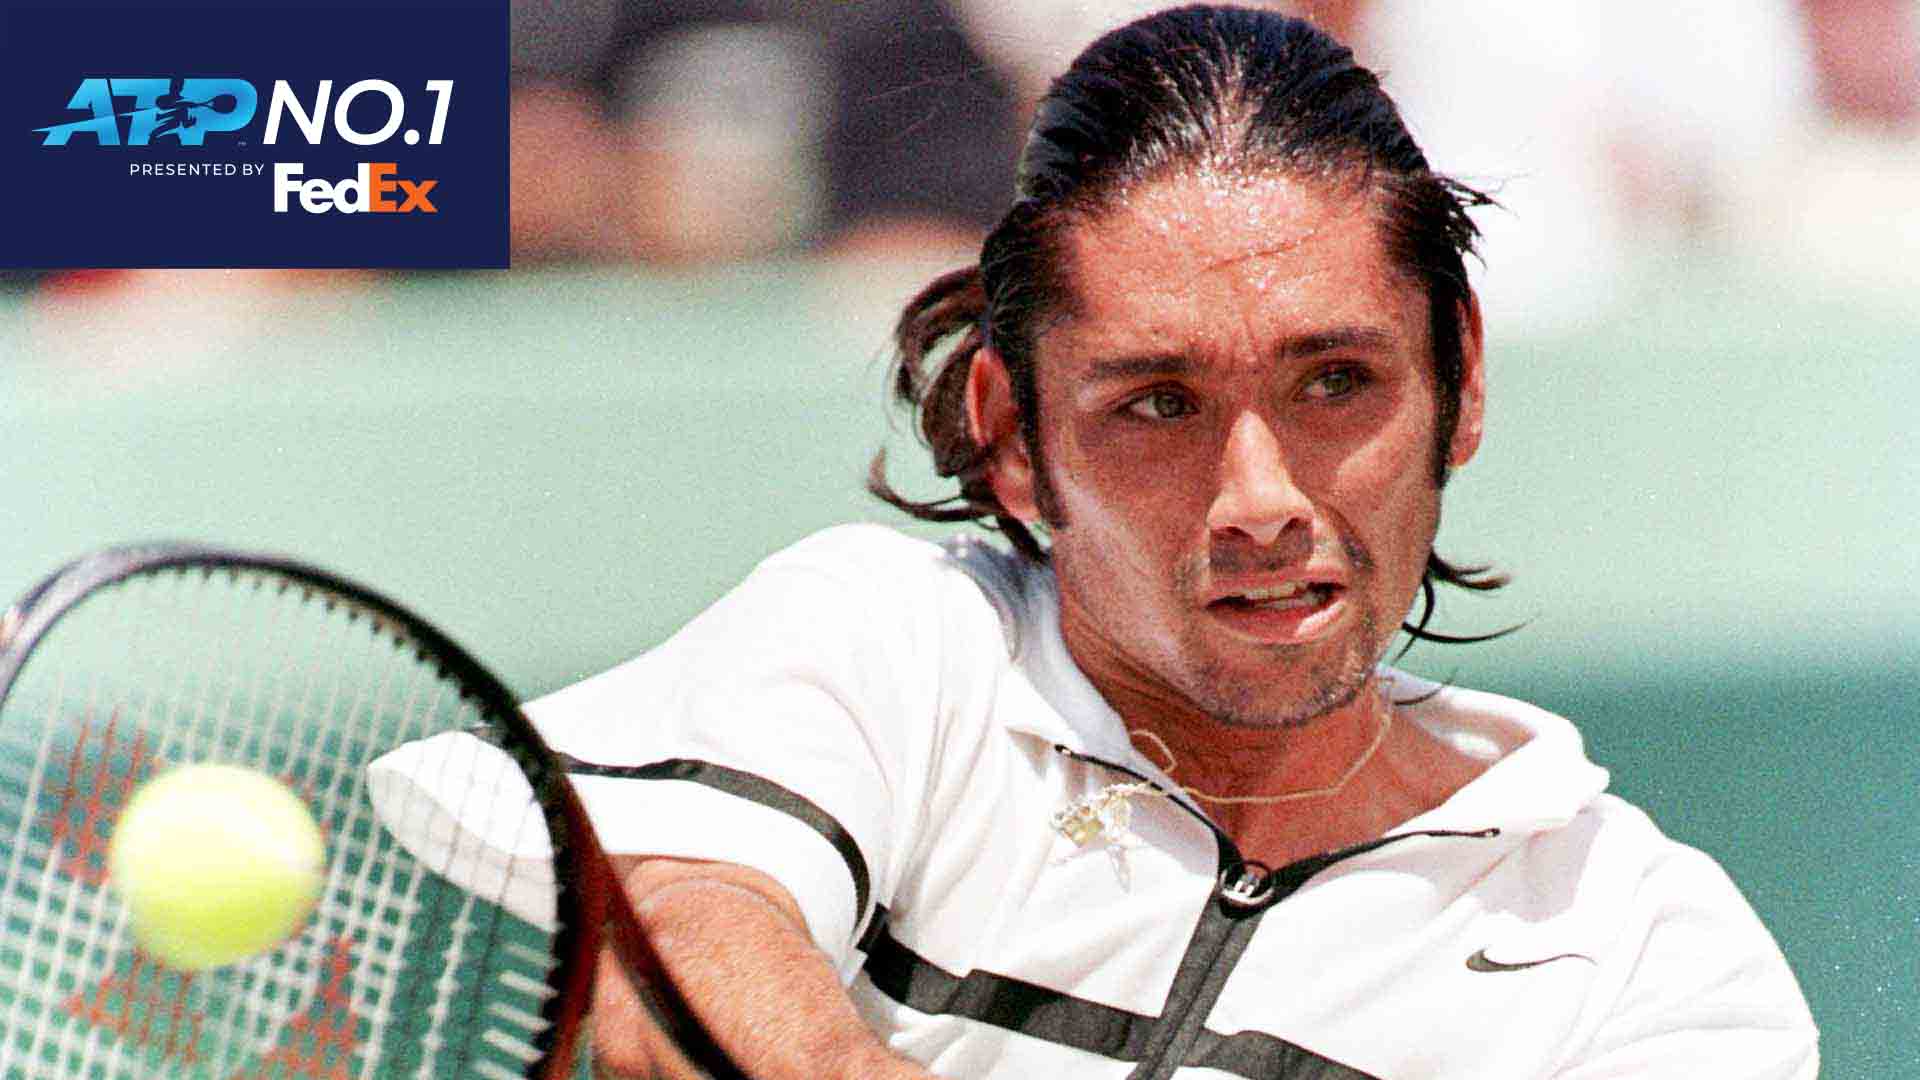 Marcelo Rios spent six weeks at the top of the FedEx ATP Rankings in 1998.